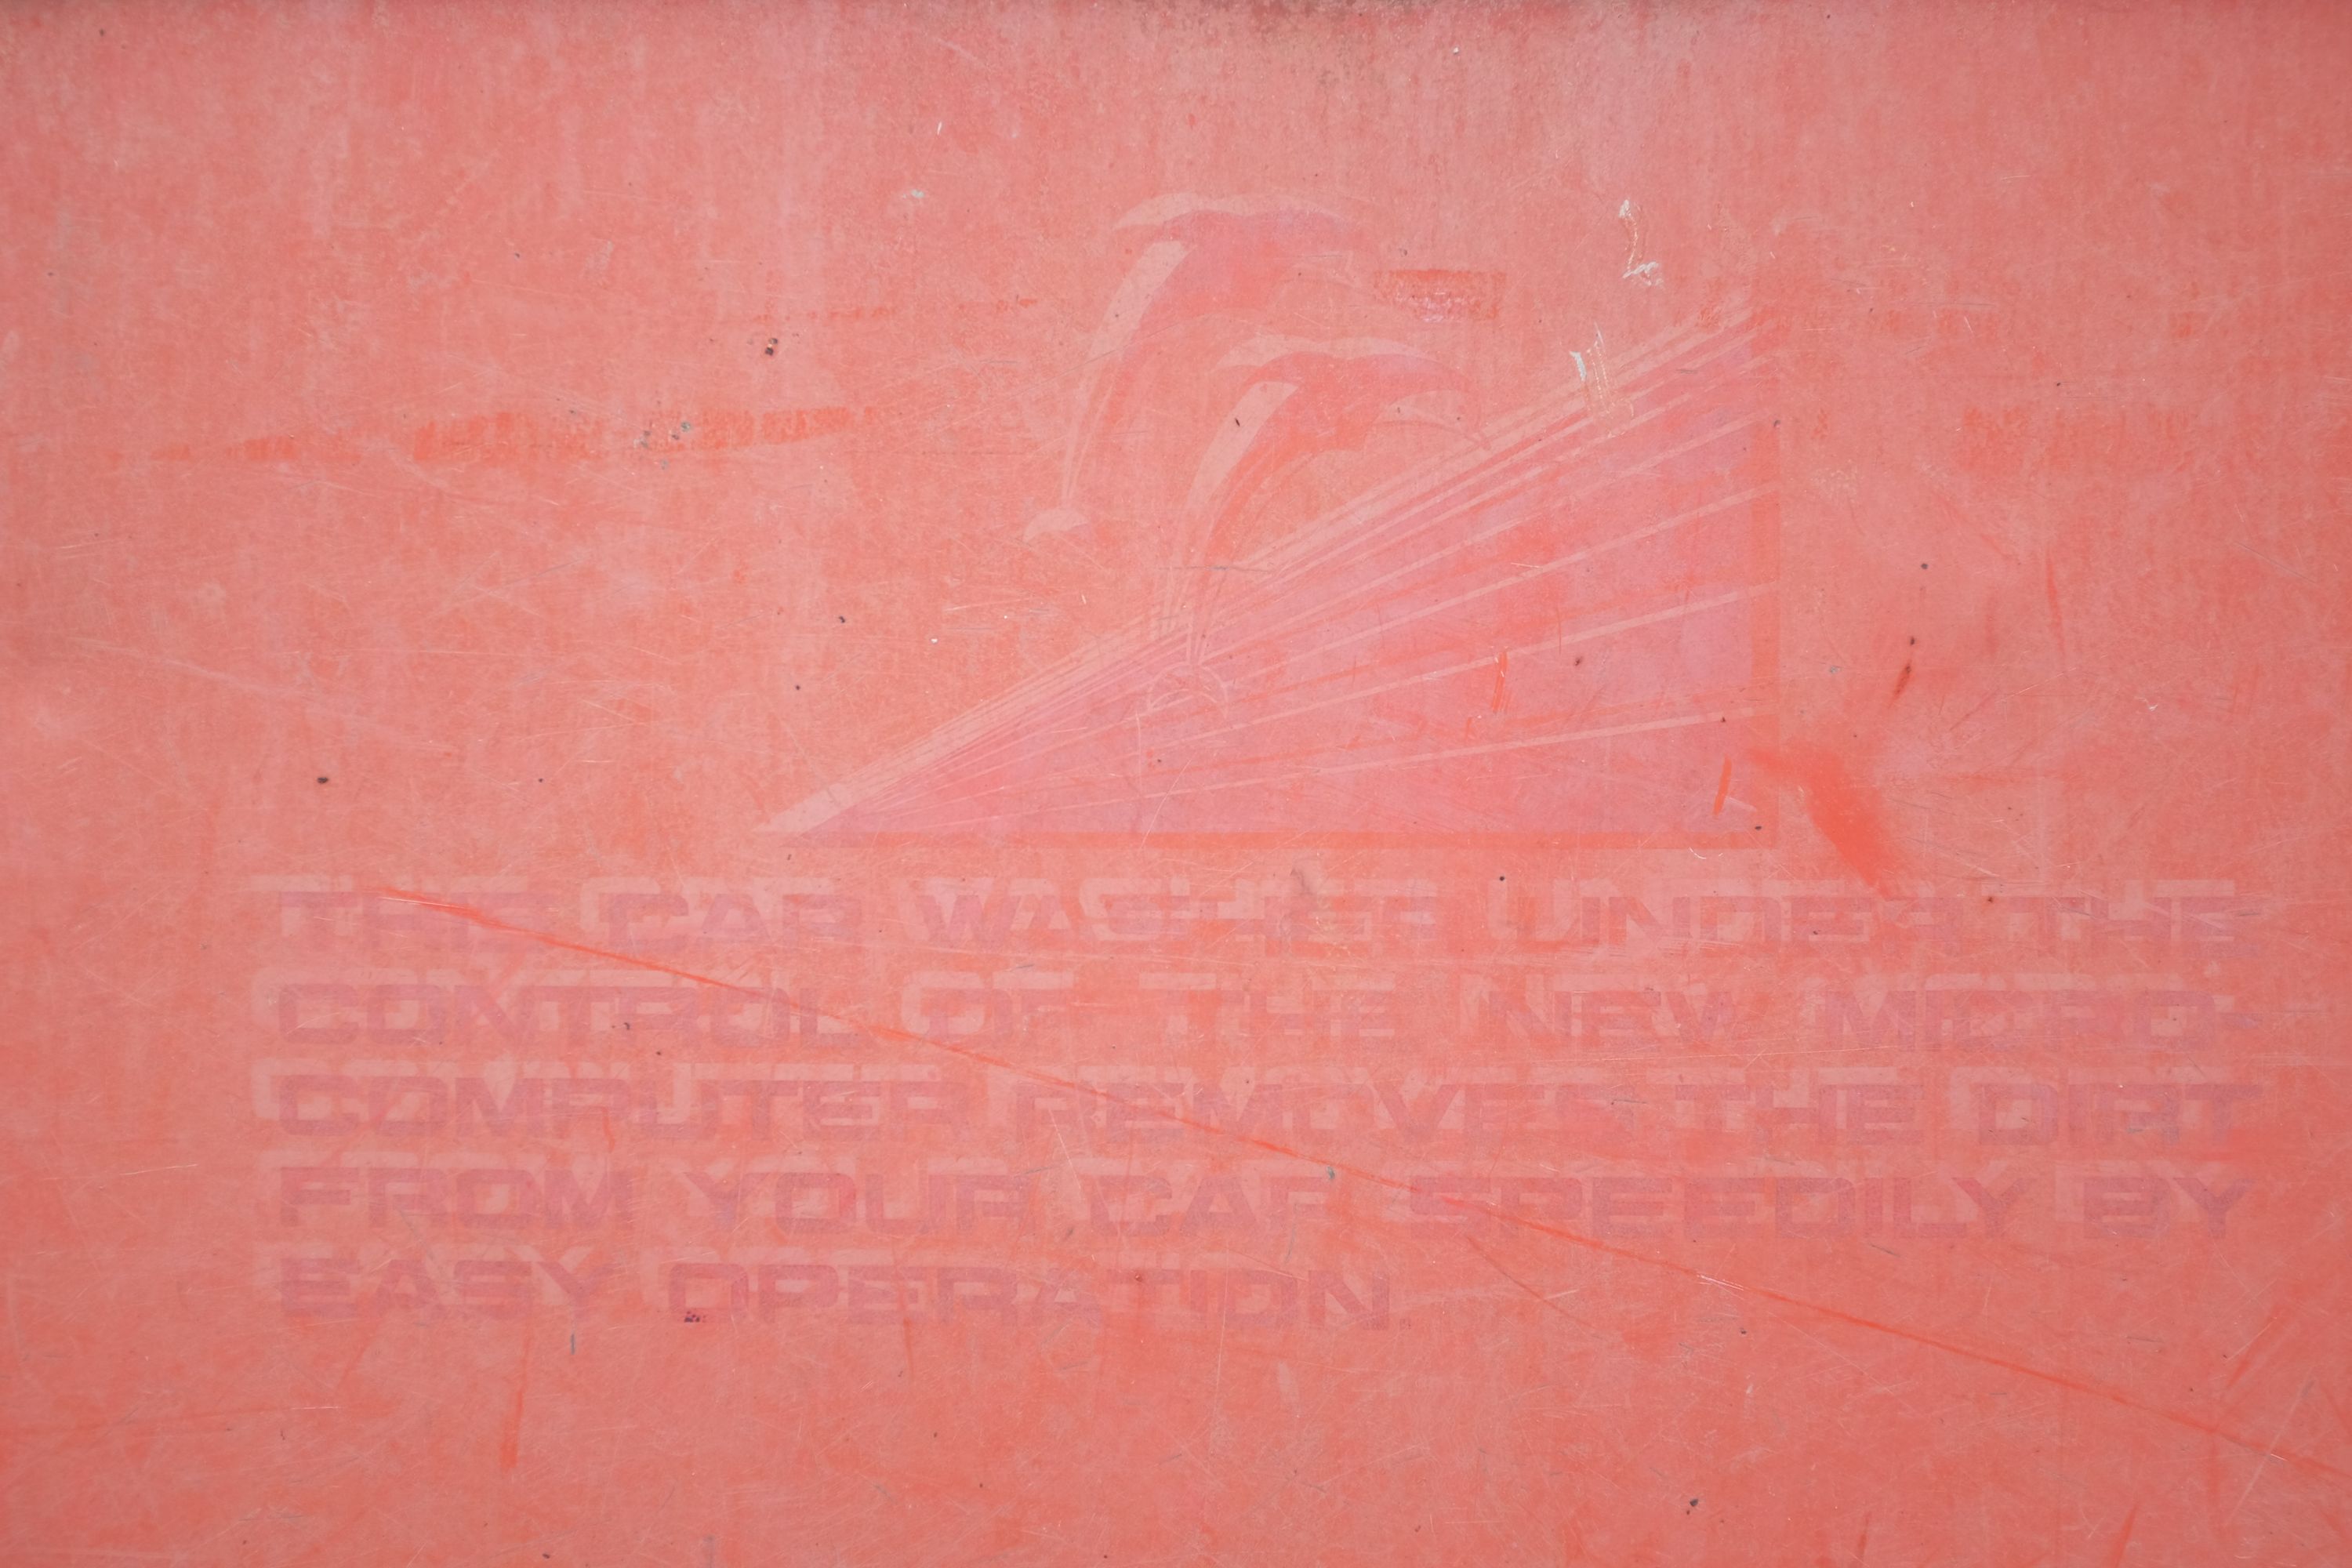 The red sign of a car wash with barely legible, faded English text.